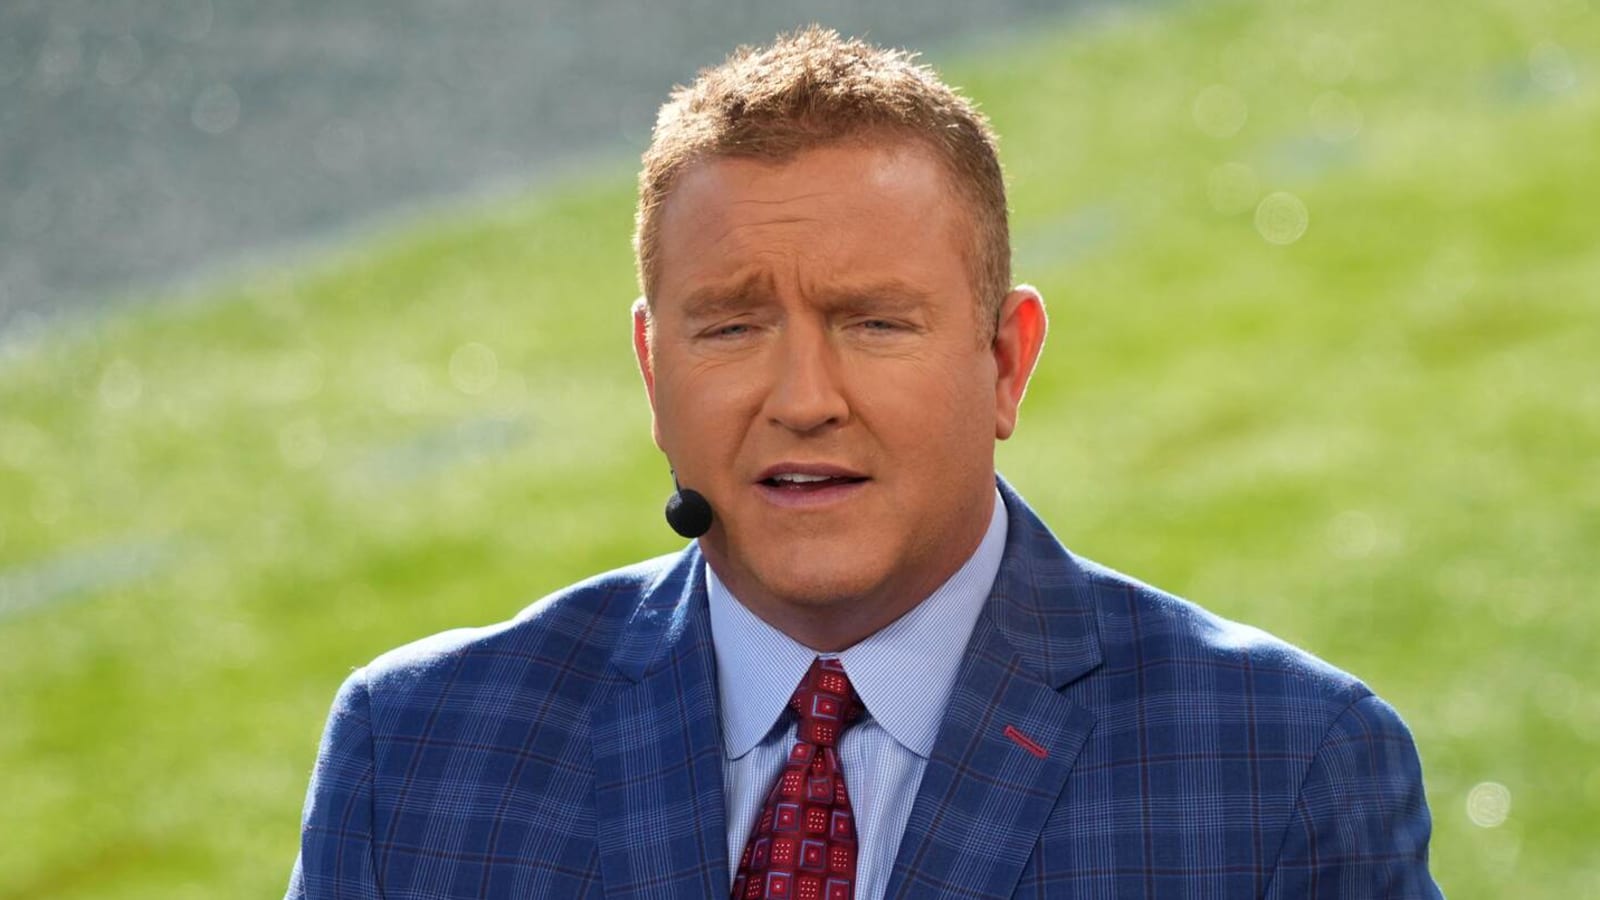 Kirk Herbstreit to miss ESPN draft coverage due to medical issue